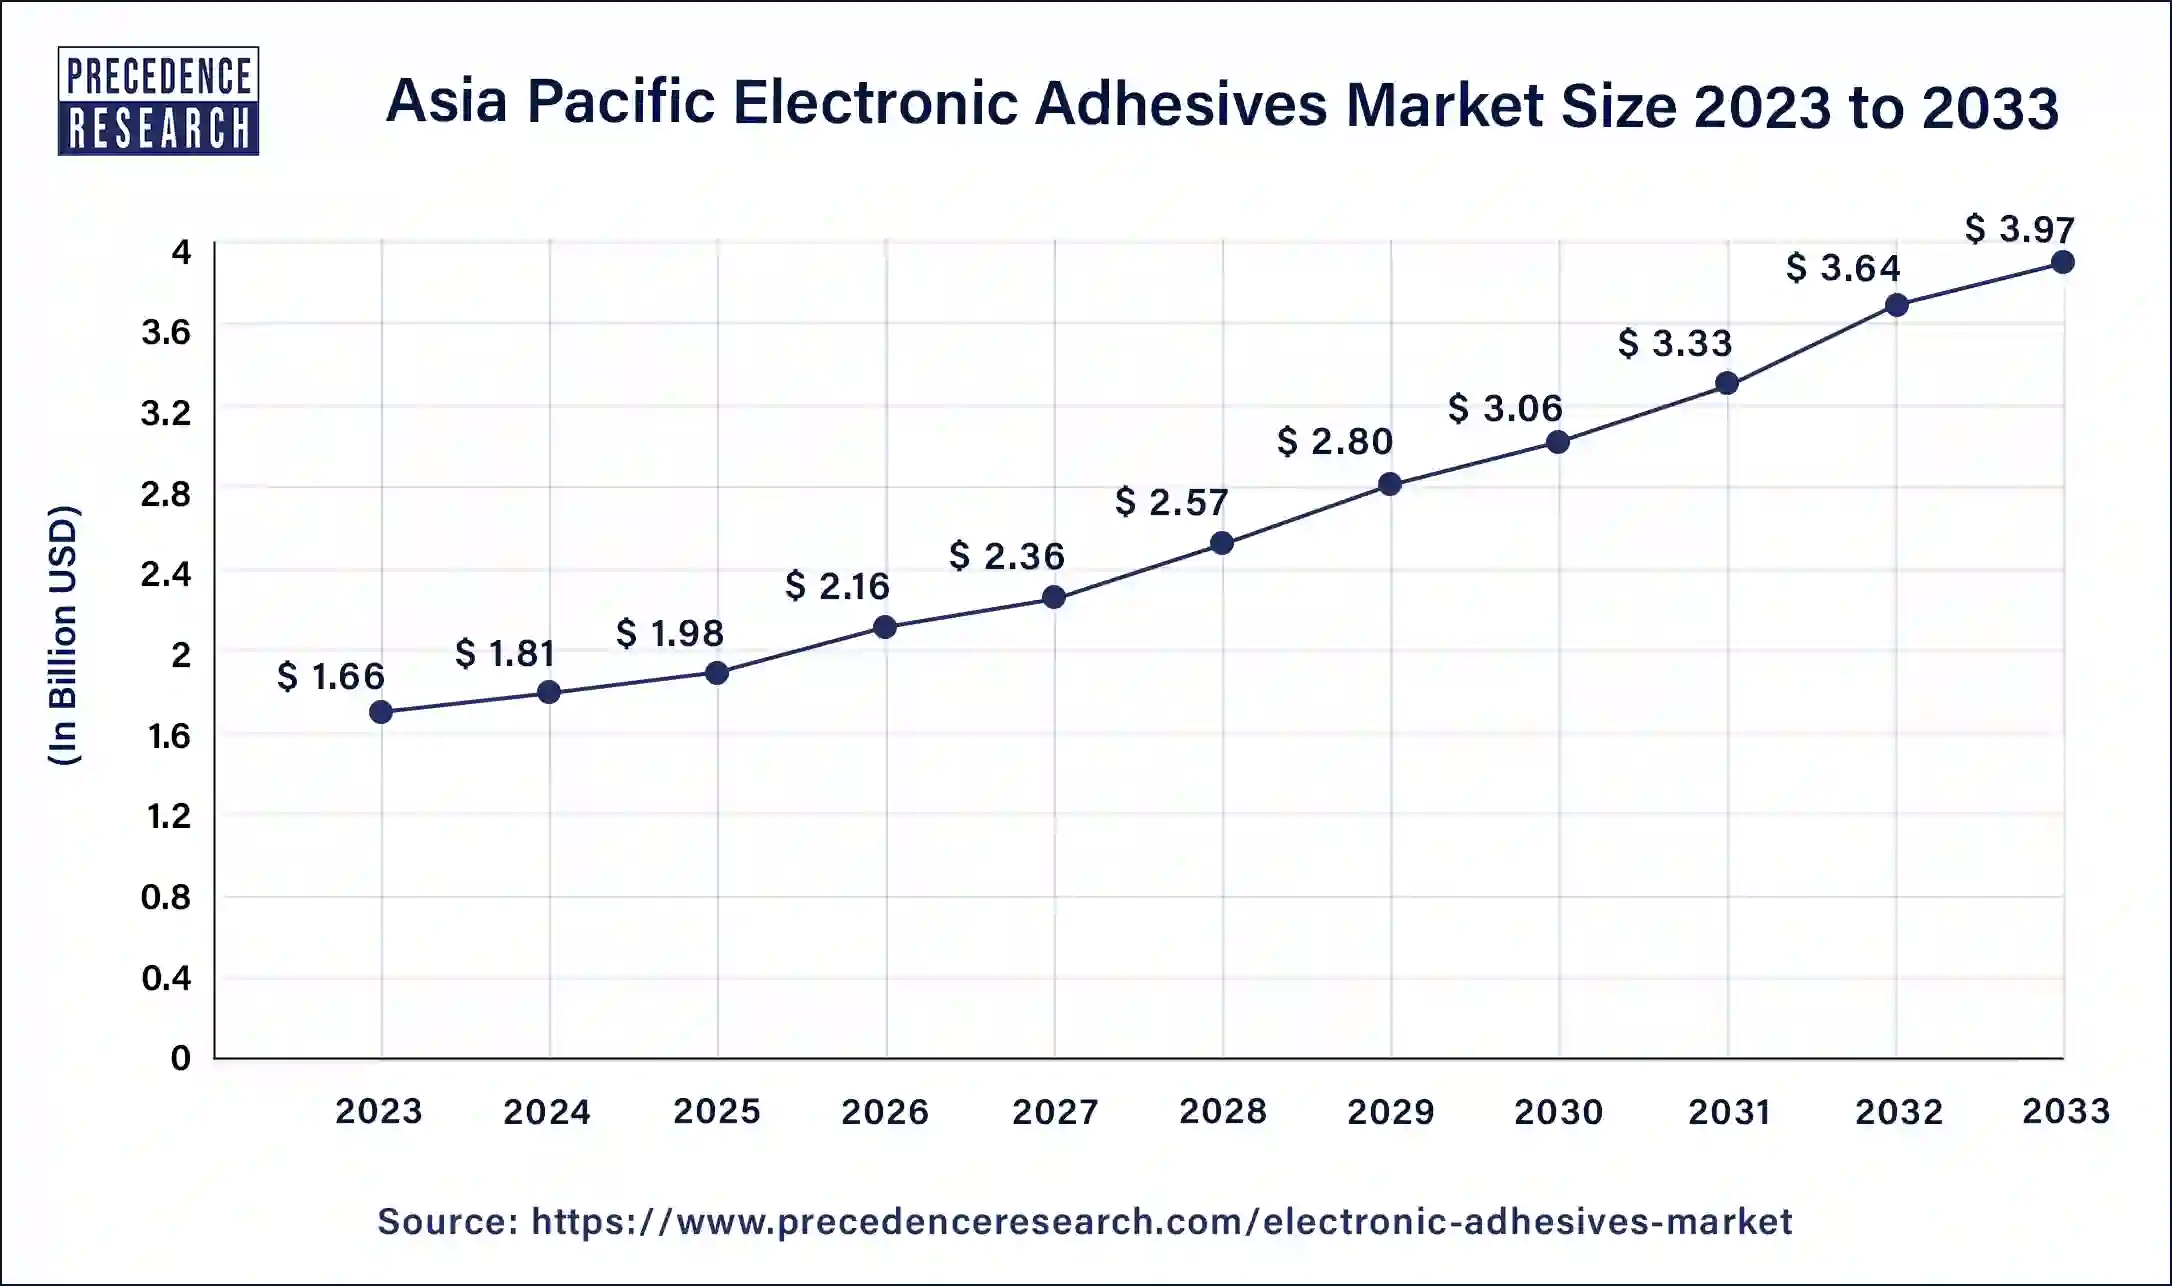 Asia Pacific Electronic Adhesives Market Size 2024 to 2033